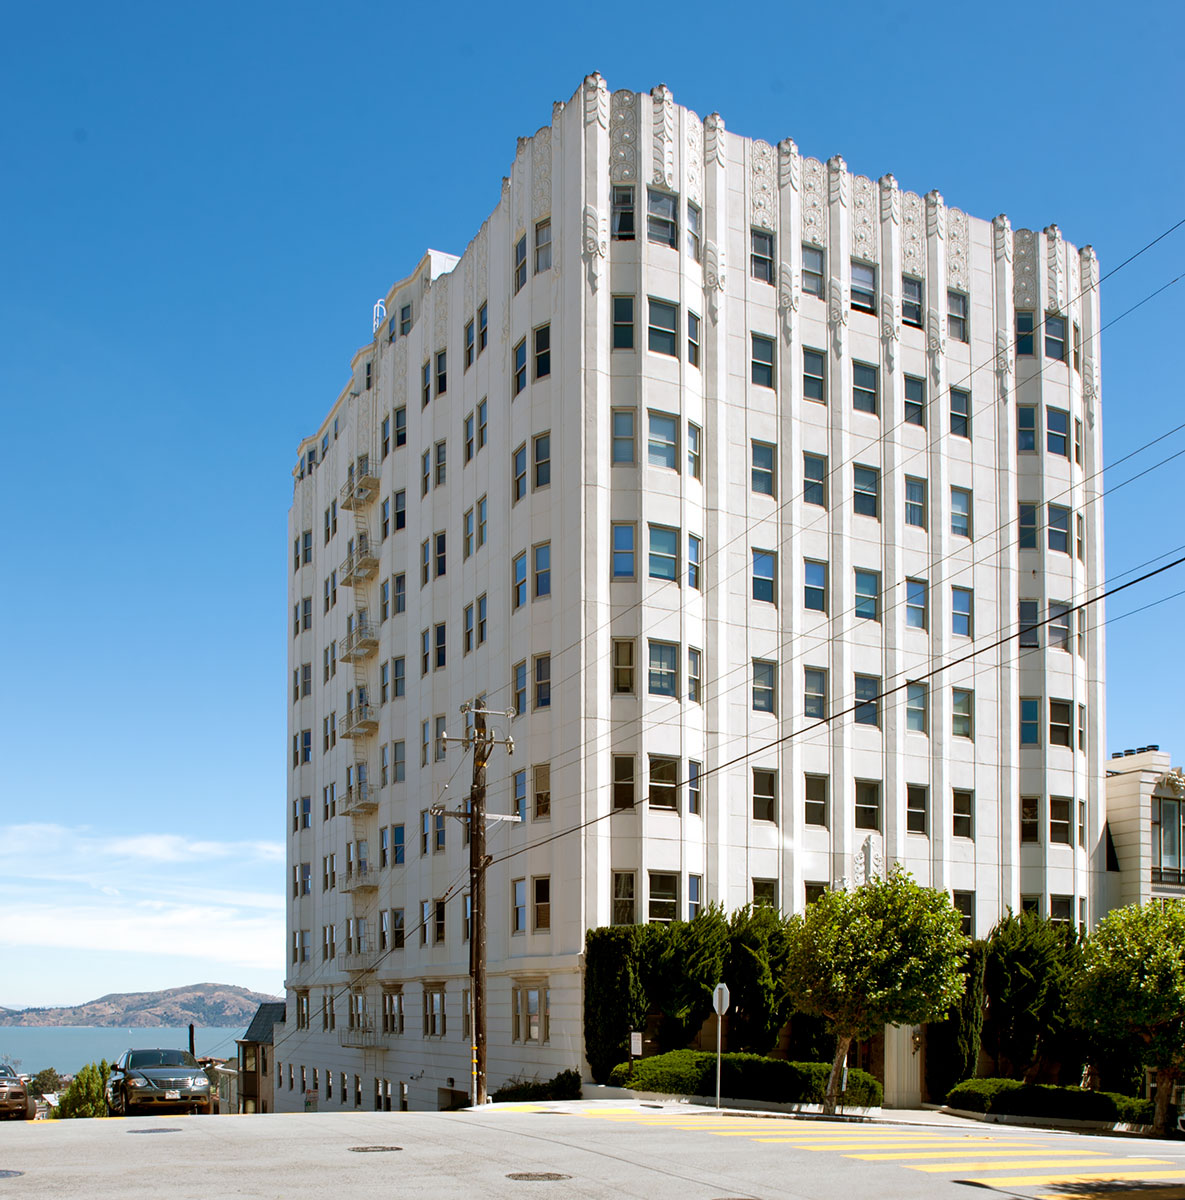 2090 Broadway in Pacific Heights, designed by H. C. Baumann, built 1935